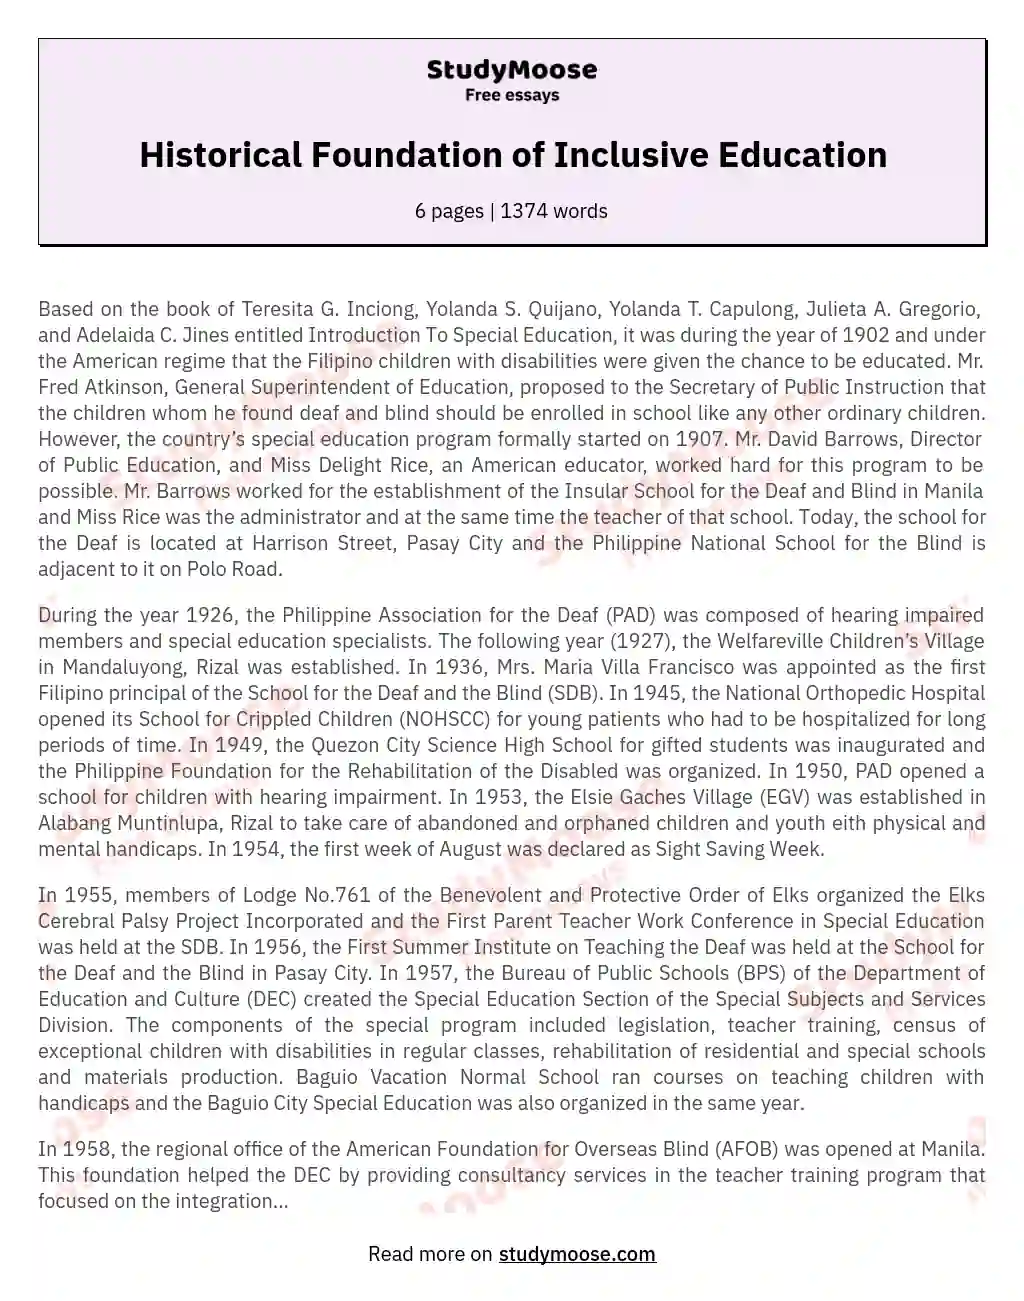 Historical Foundation of Inclusive Education essay